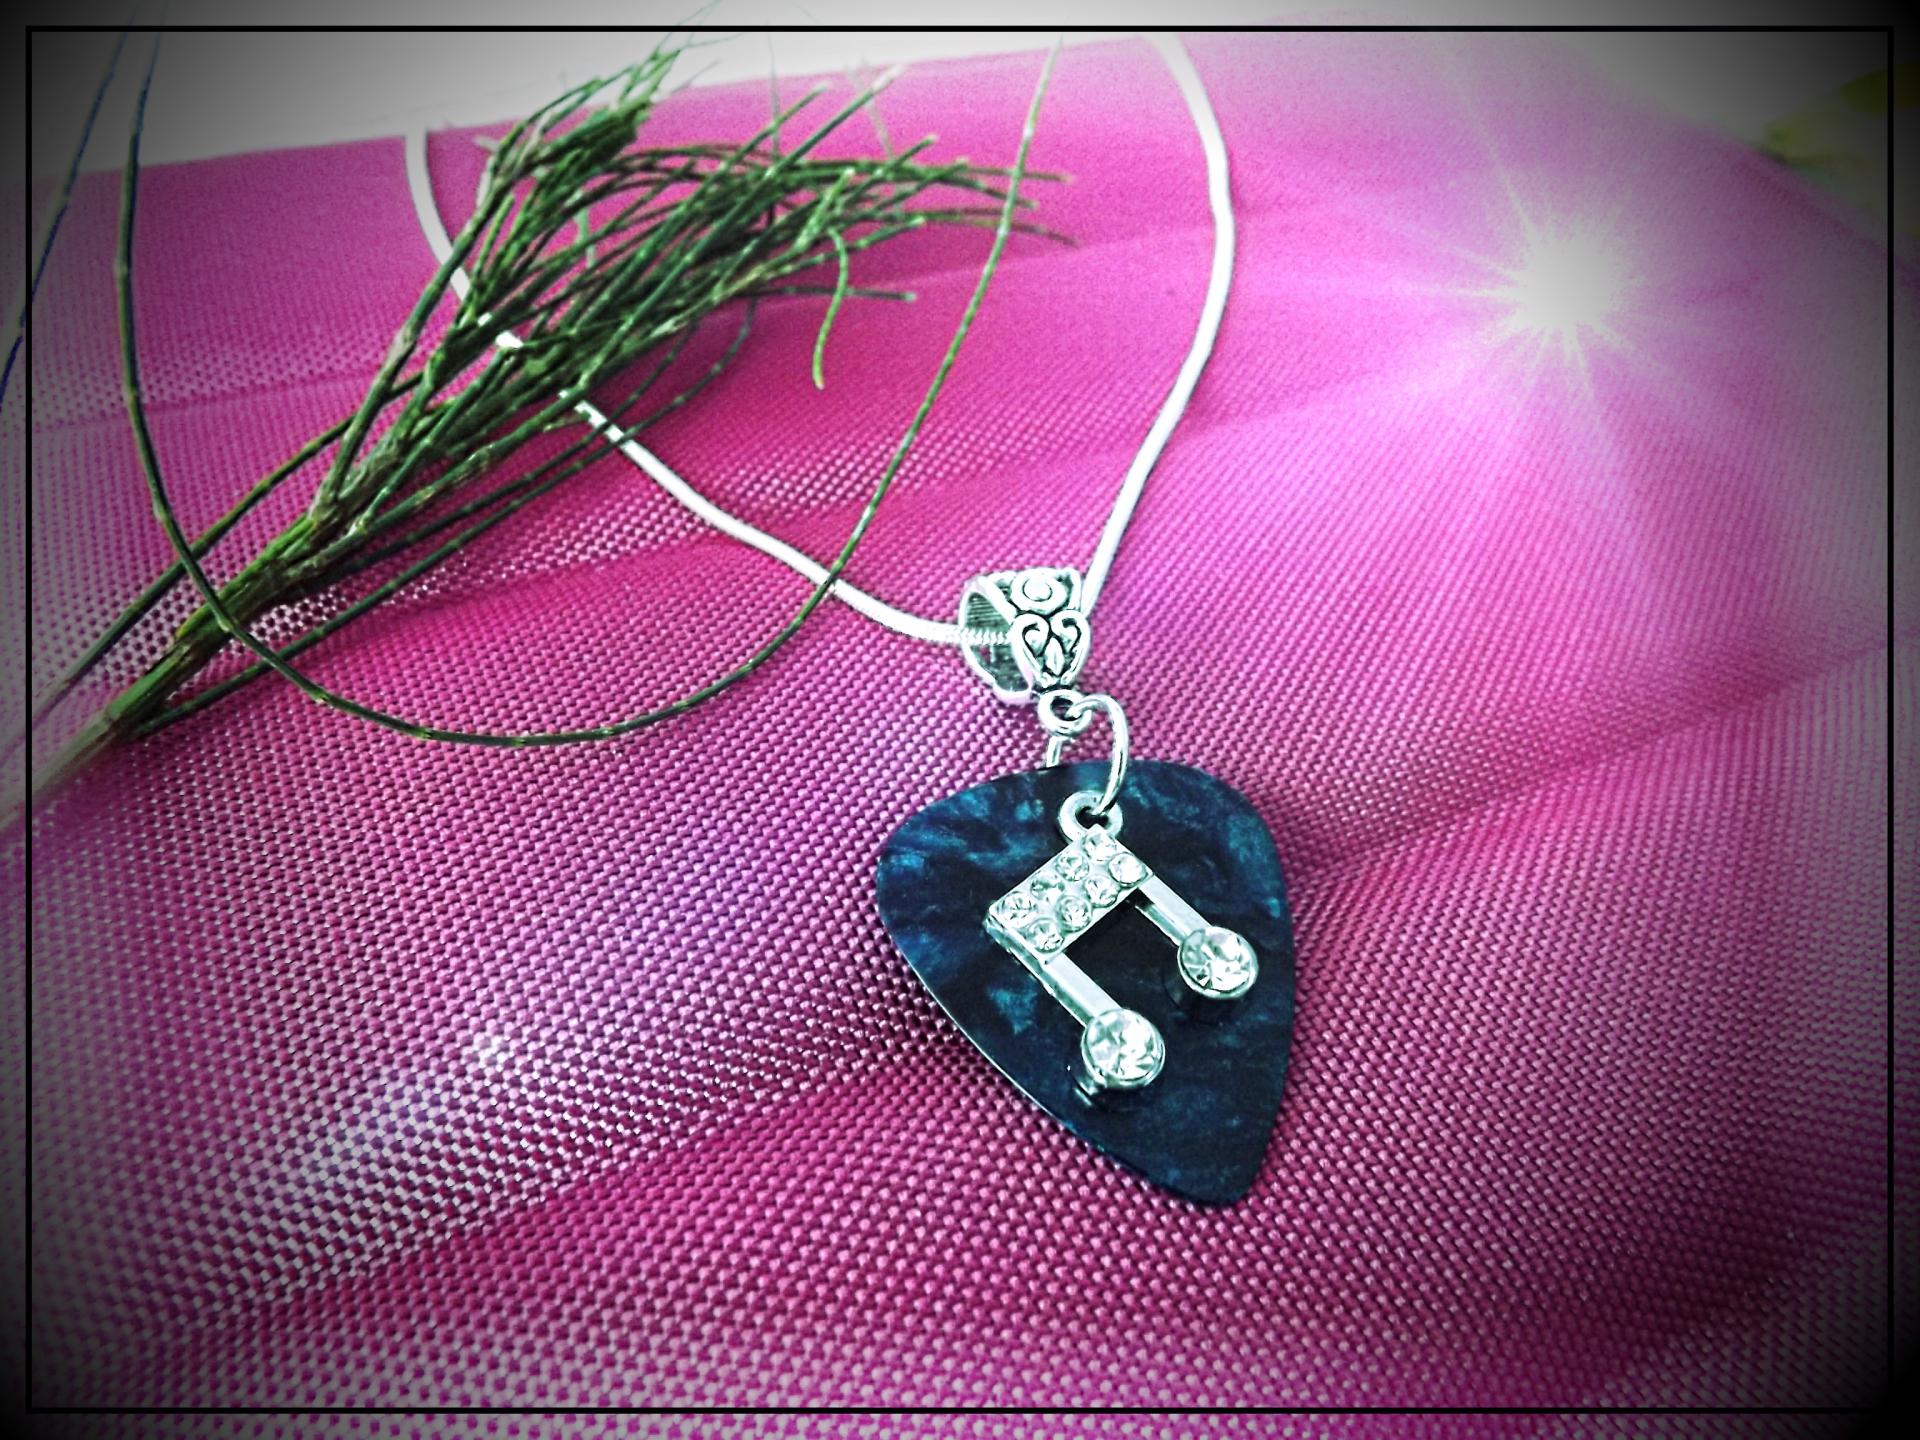 Guitar Pick Necklace with Music Note Charm -Customisable